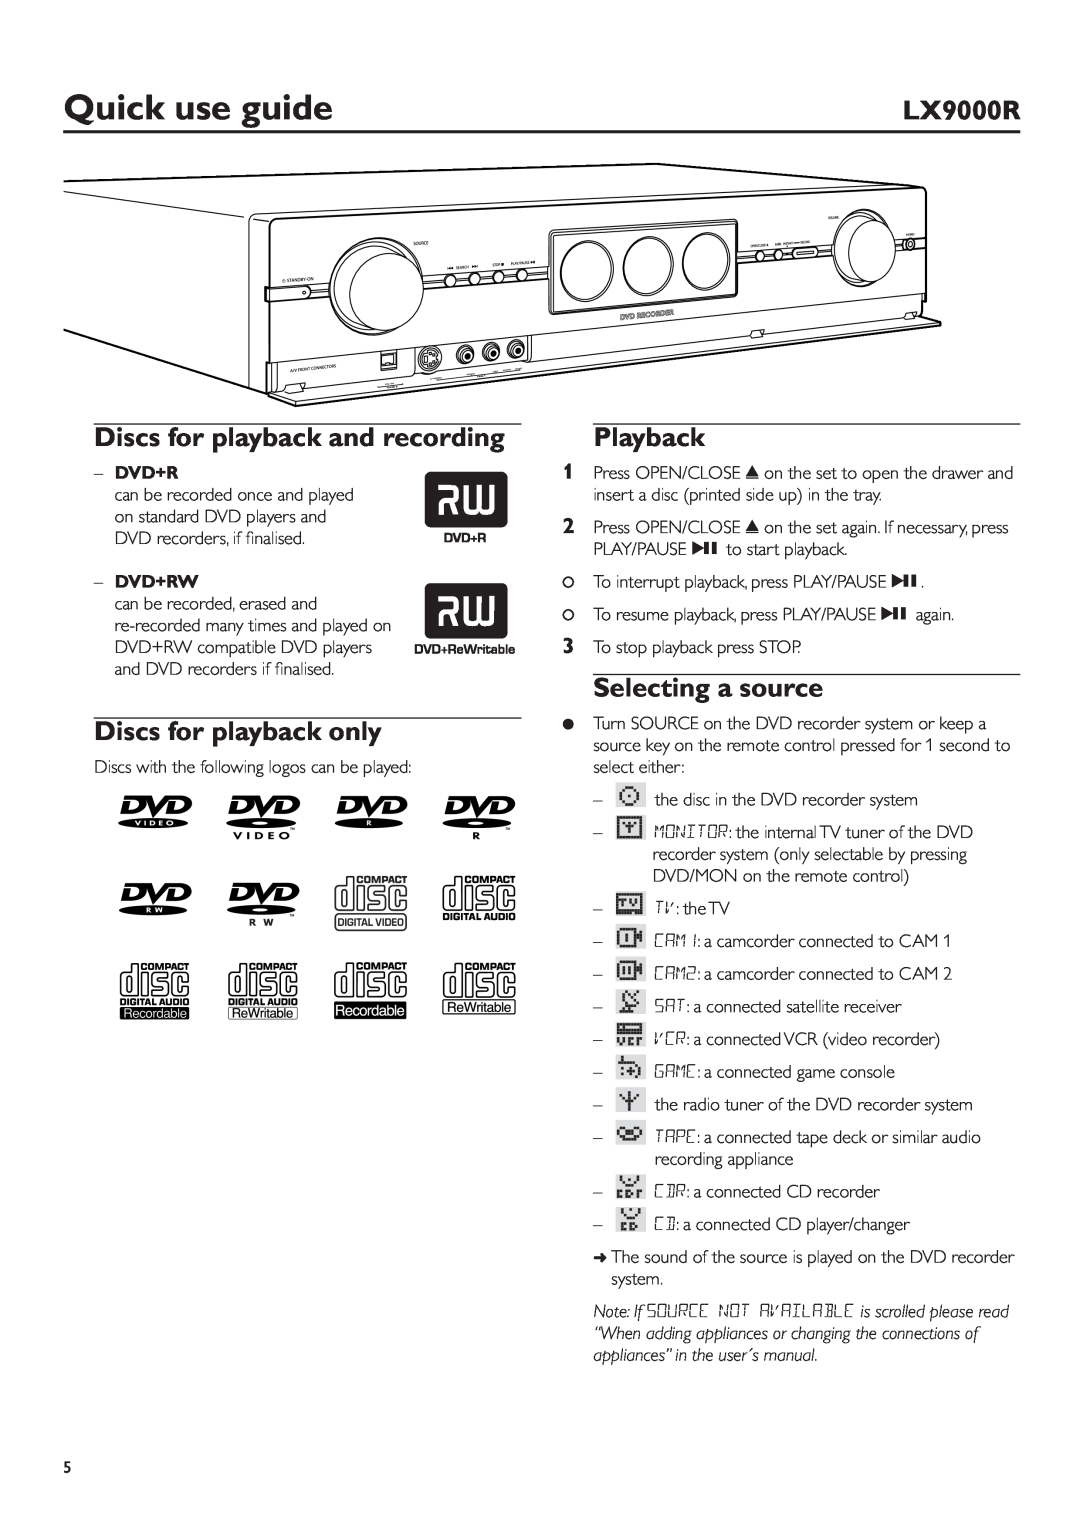 Philips LX9000R/25S user manual Discs for playback and recording, Discs for playback only, Playback, Selecting a source 